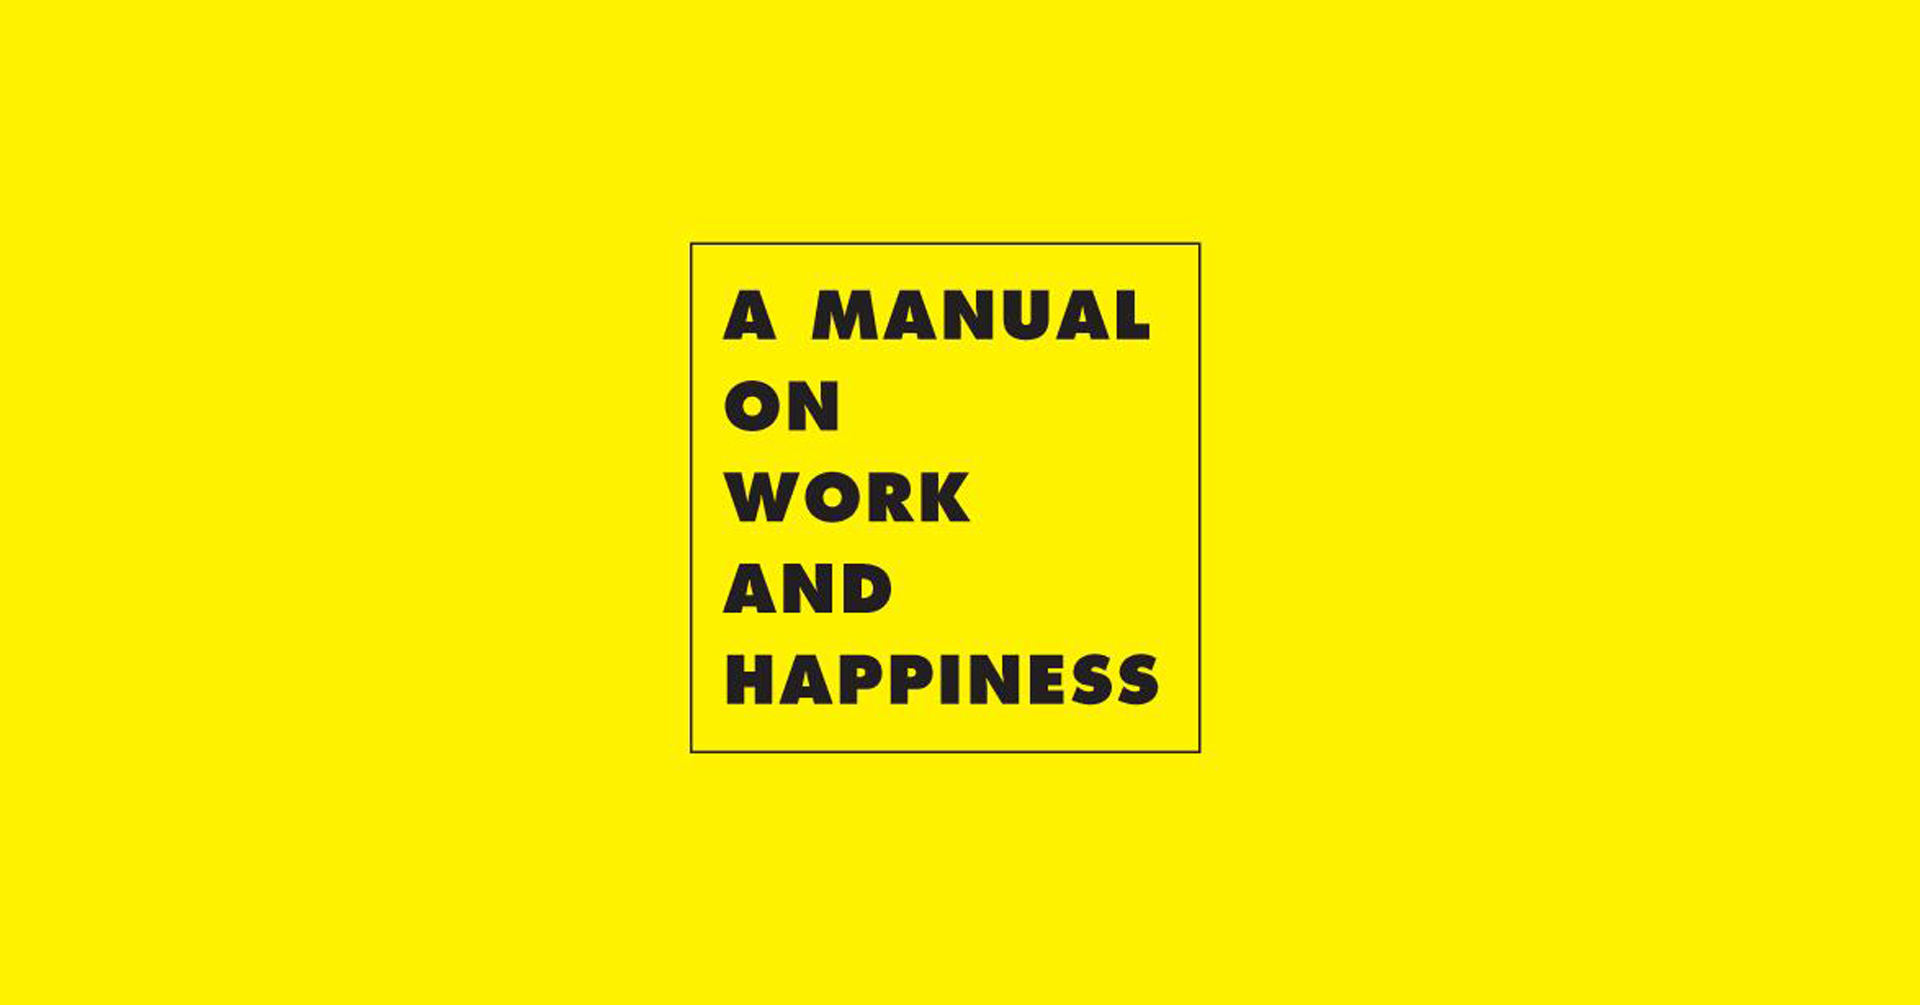 A Manual on Work and Happiness